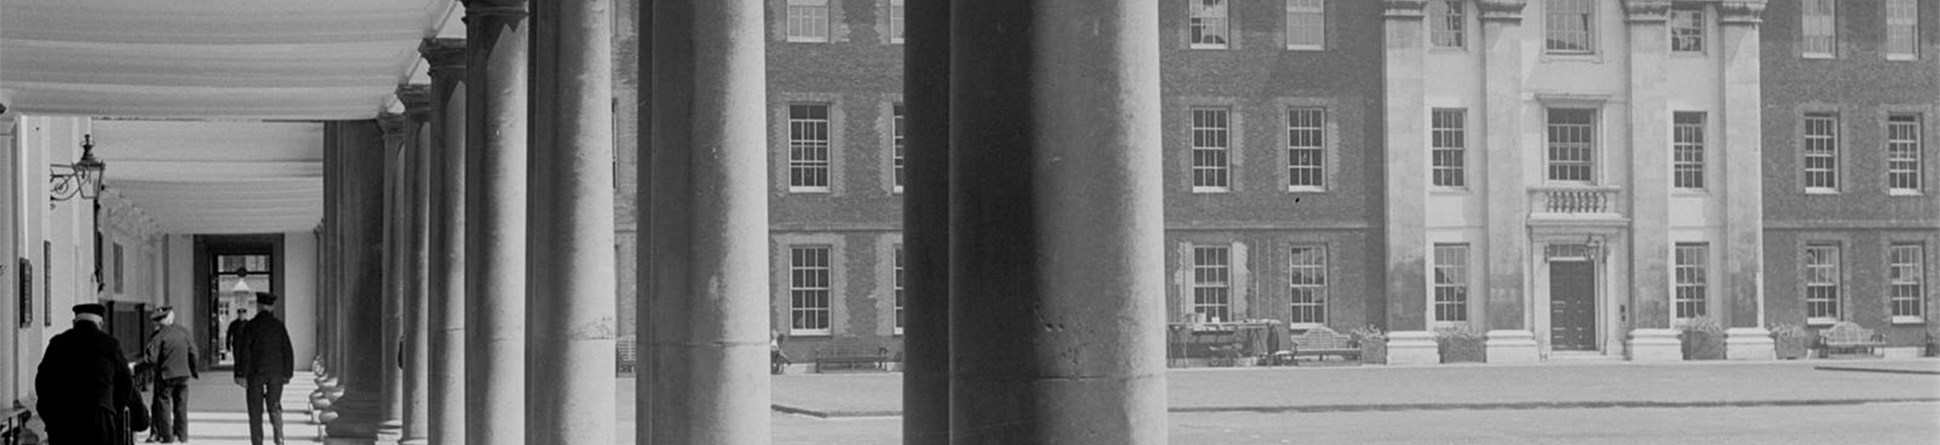 Exterior view of Royal Hospital Chelsea from the colonnade